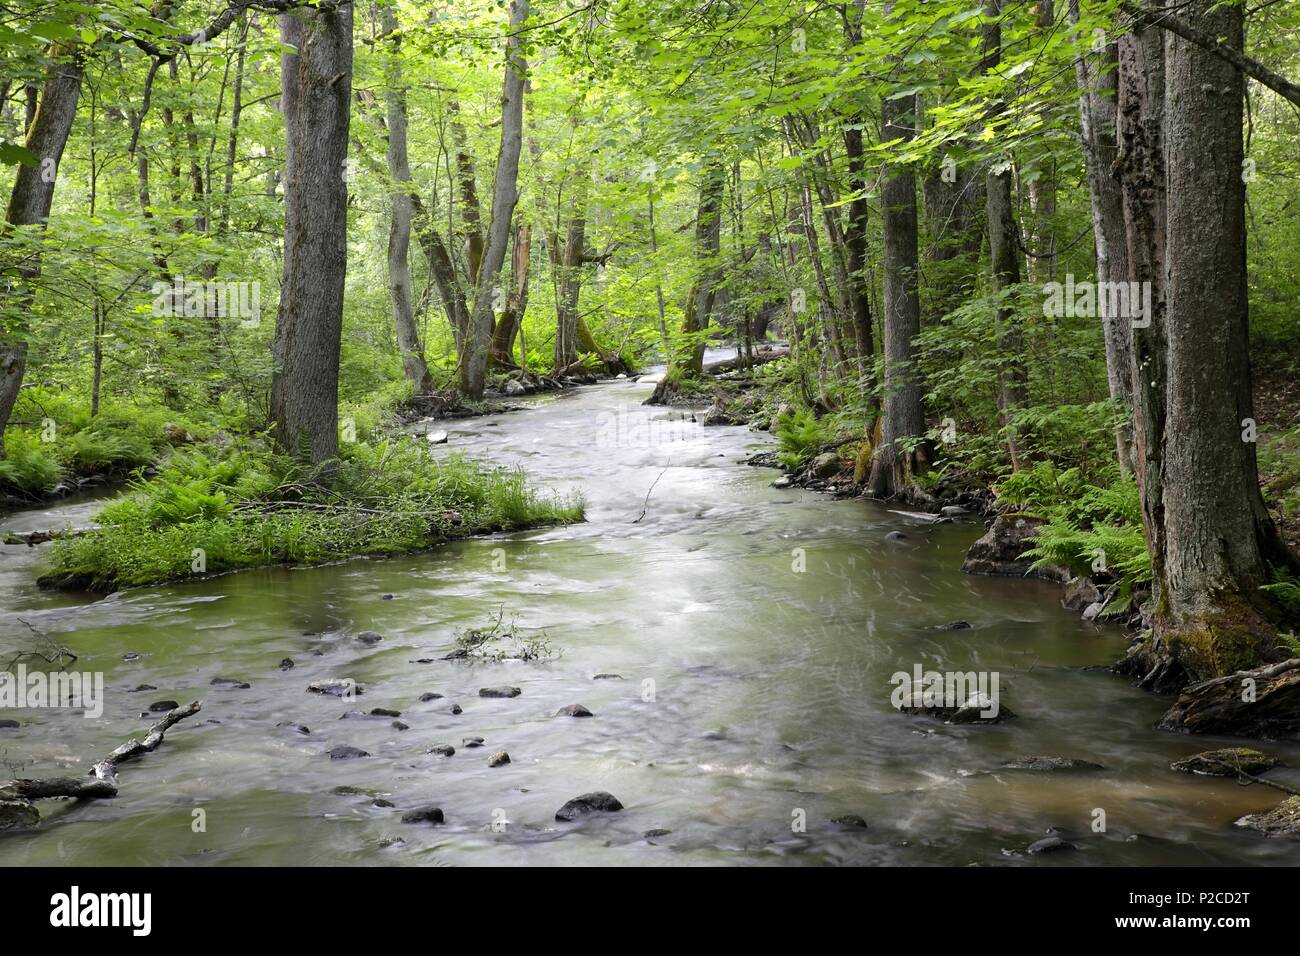 Forest stream, flowing water over rocks and green lush foliage Stock Photo